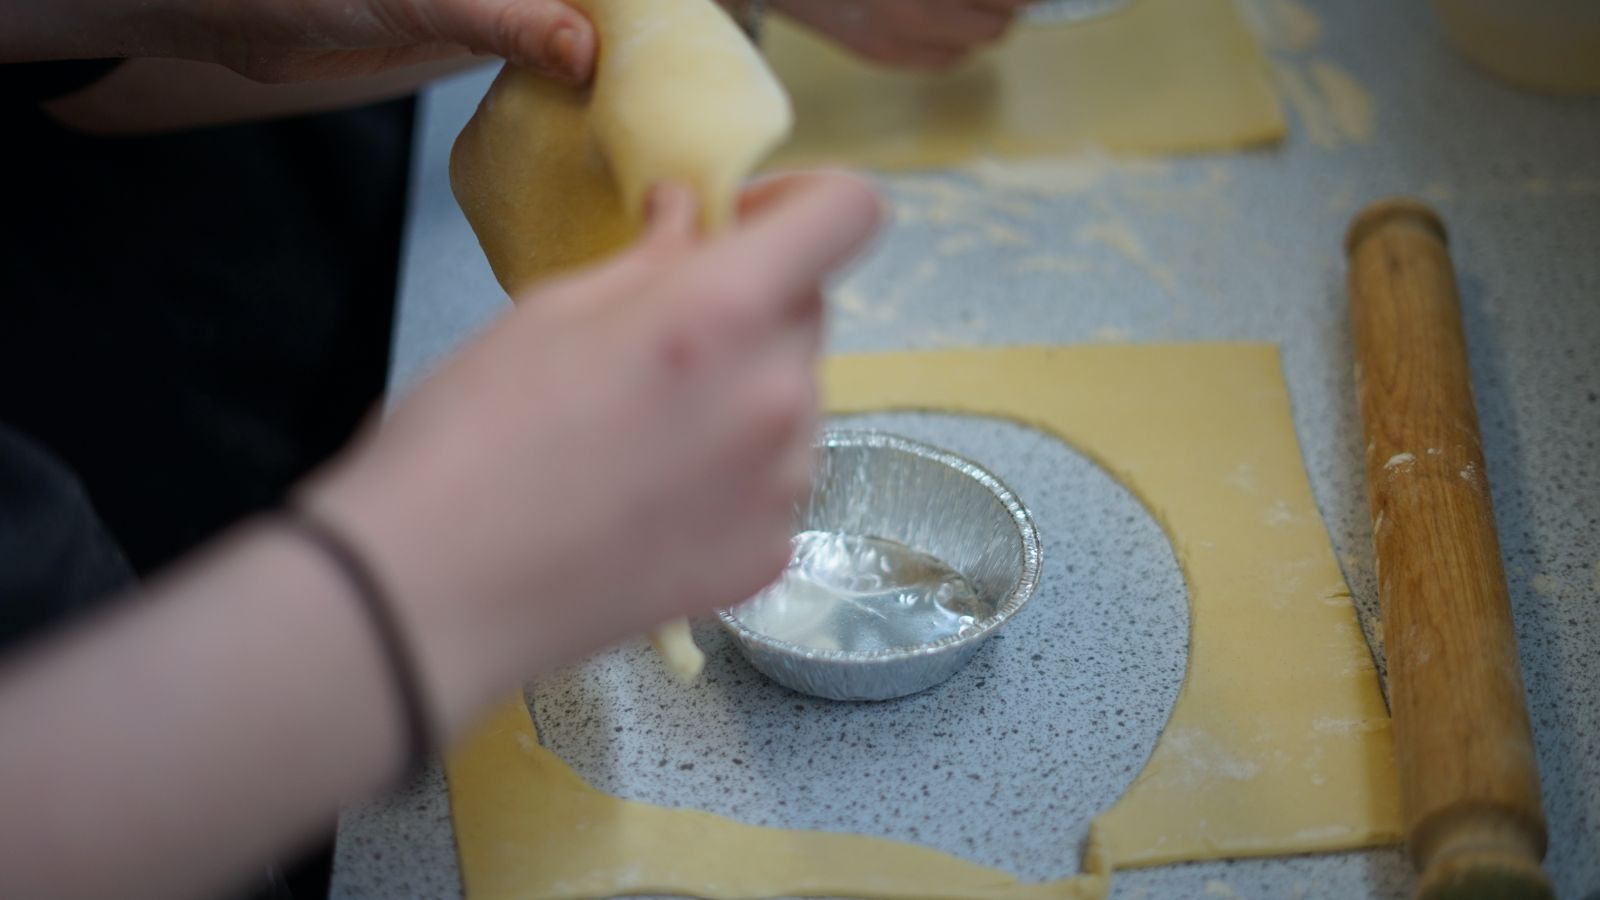 Student cutting pastry